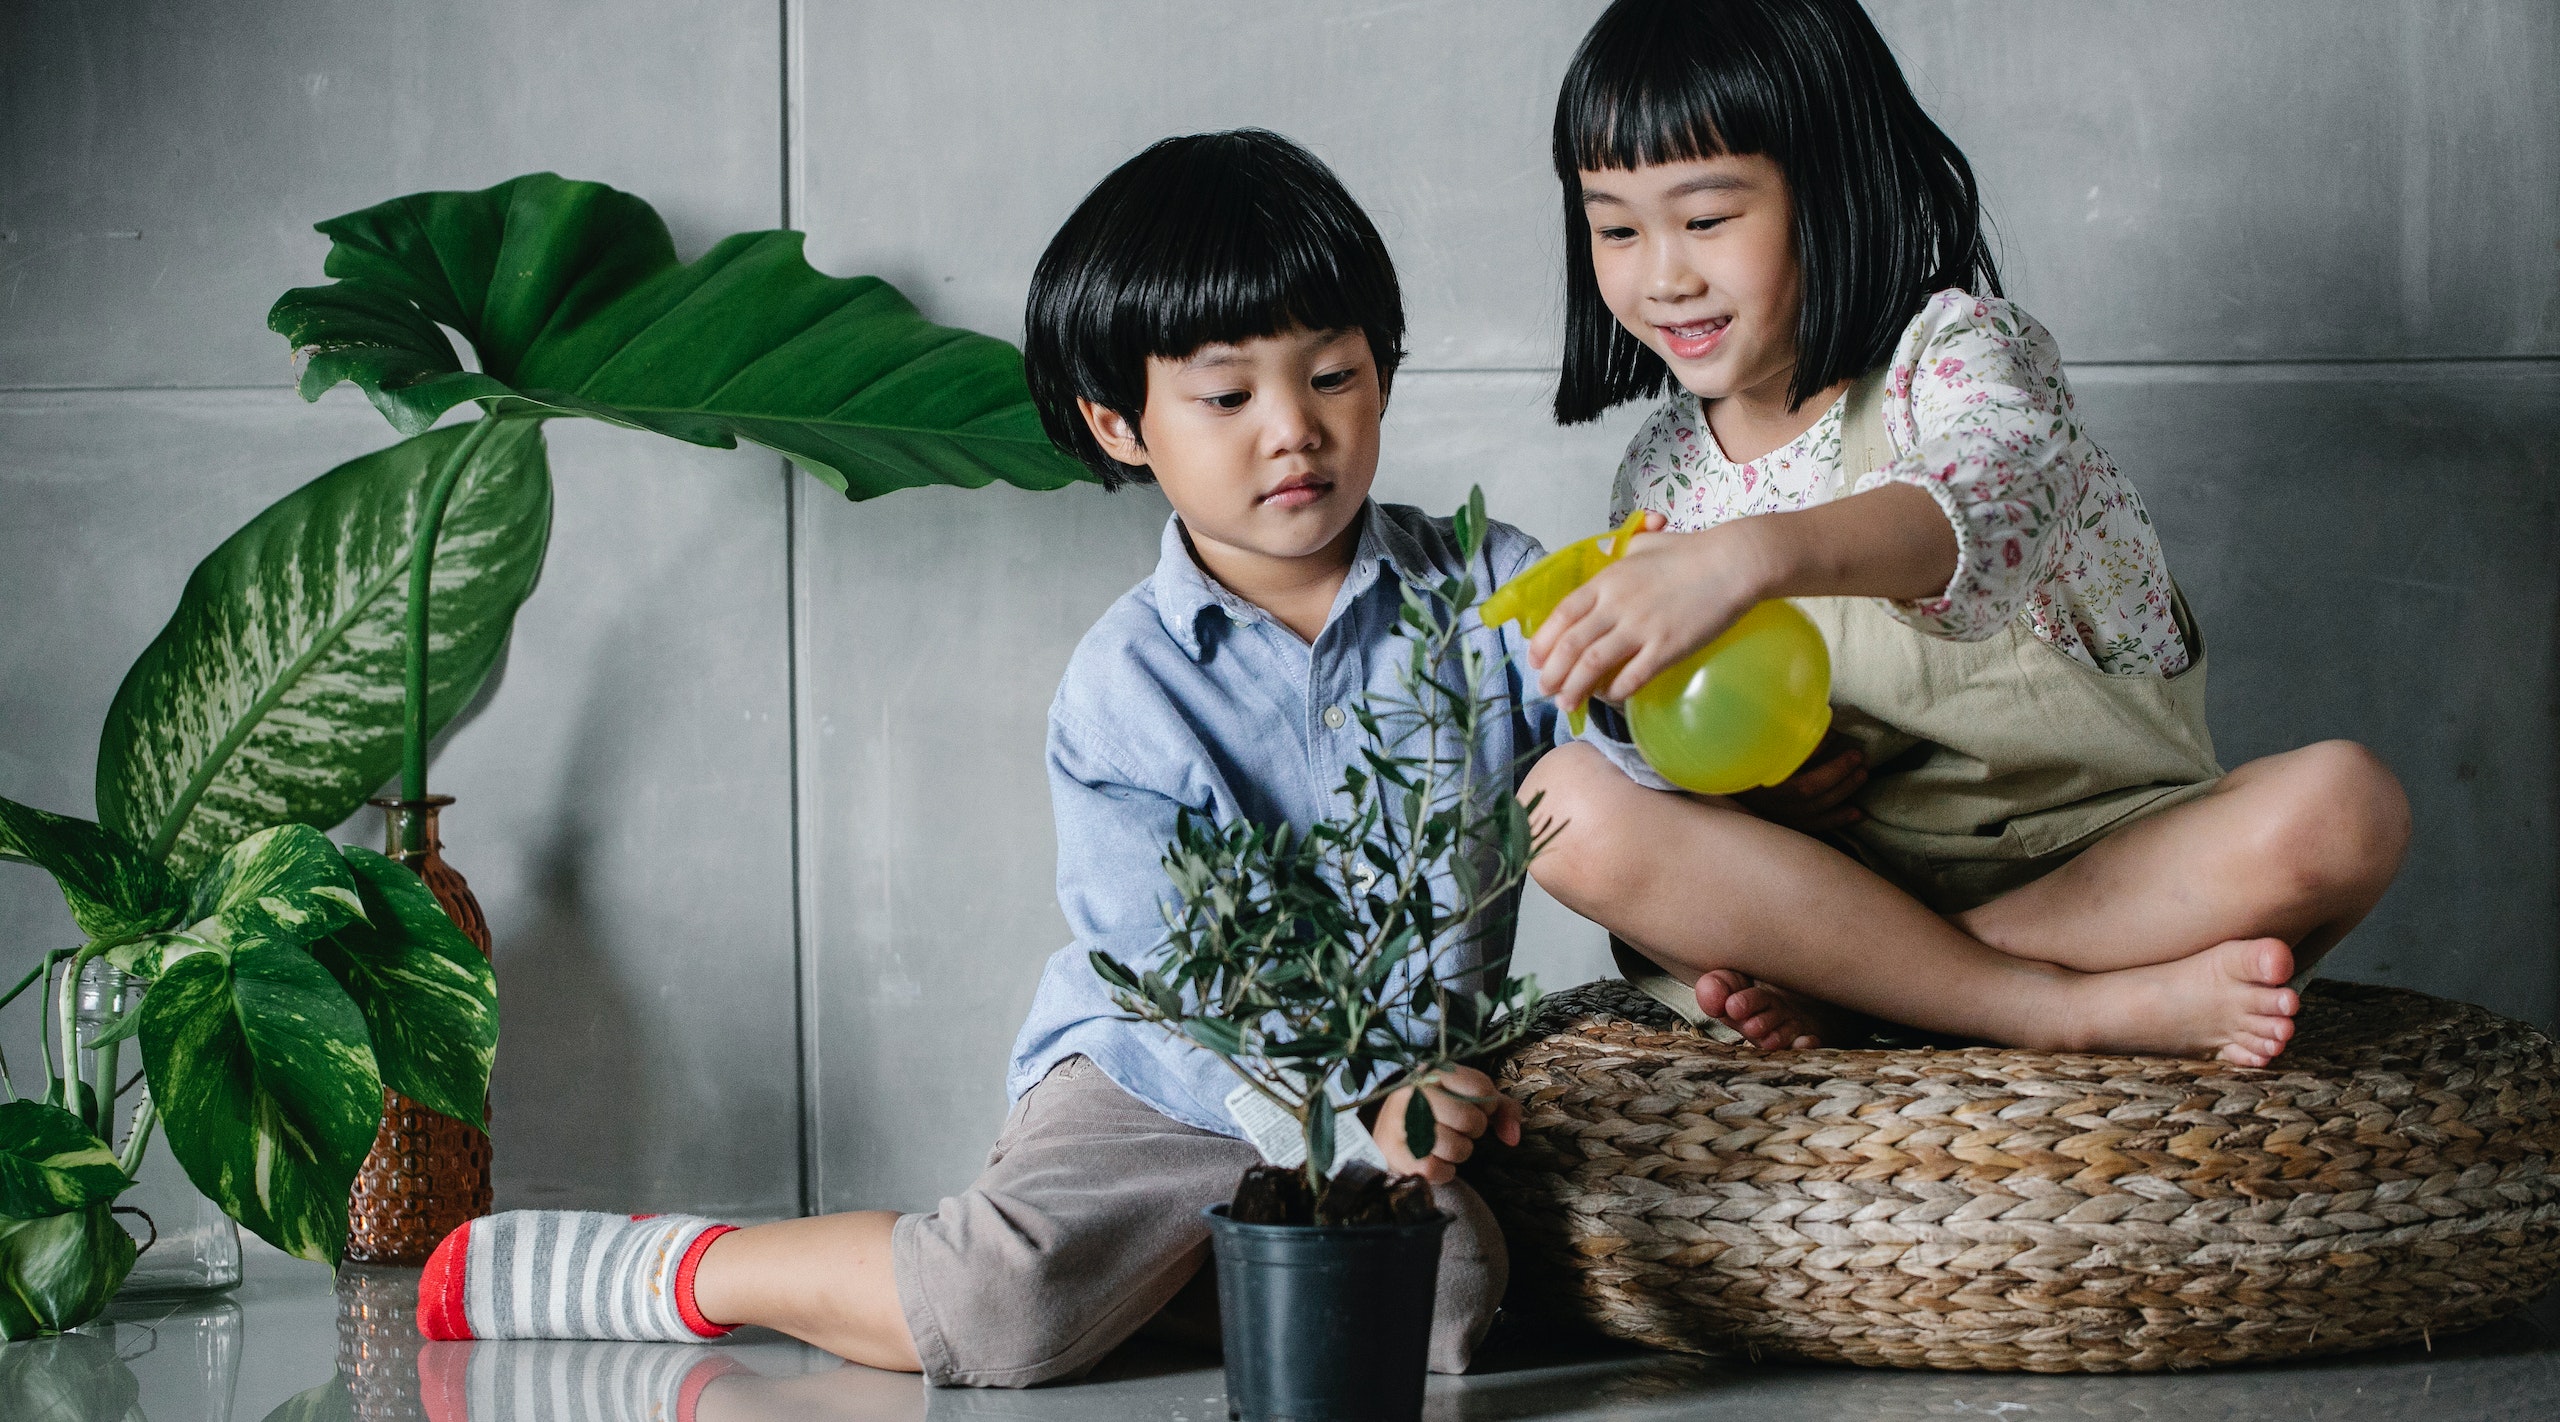 Sensitive children spraying a plant with water